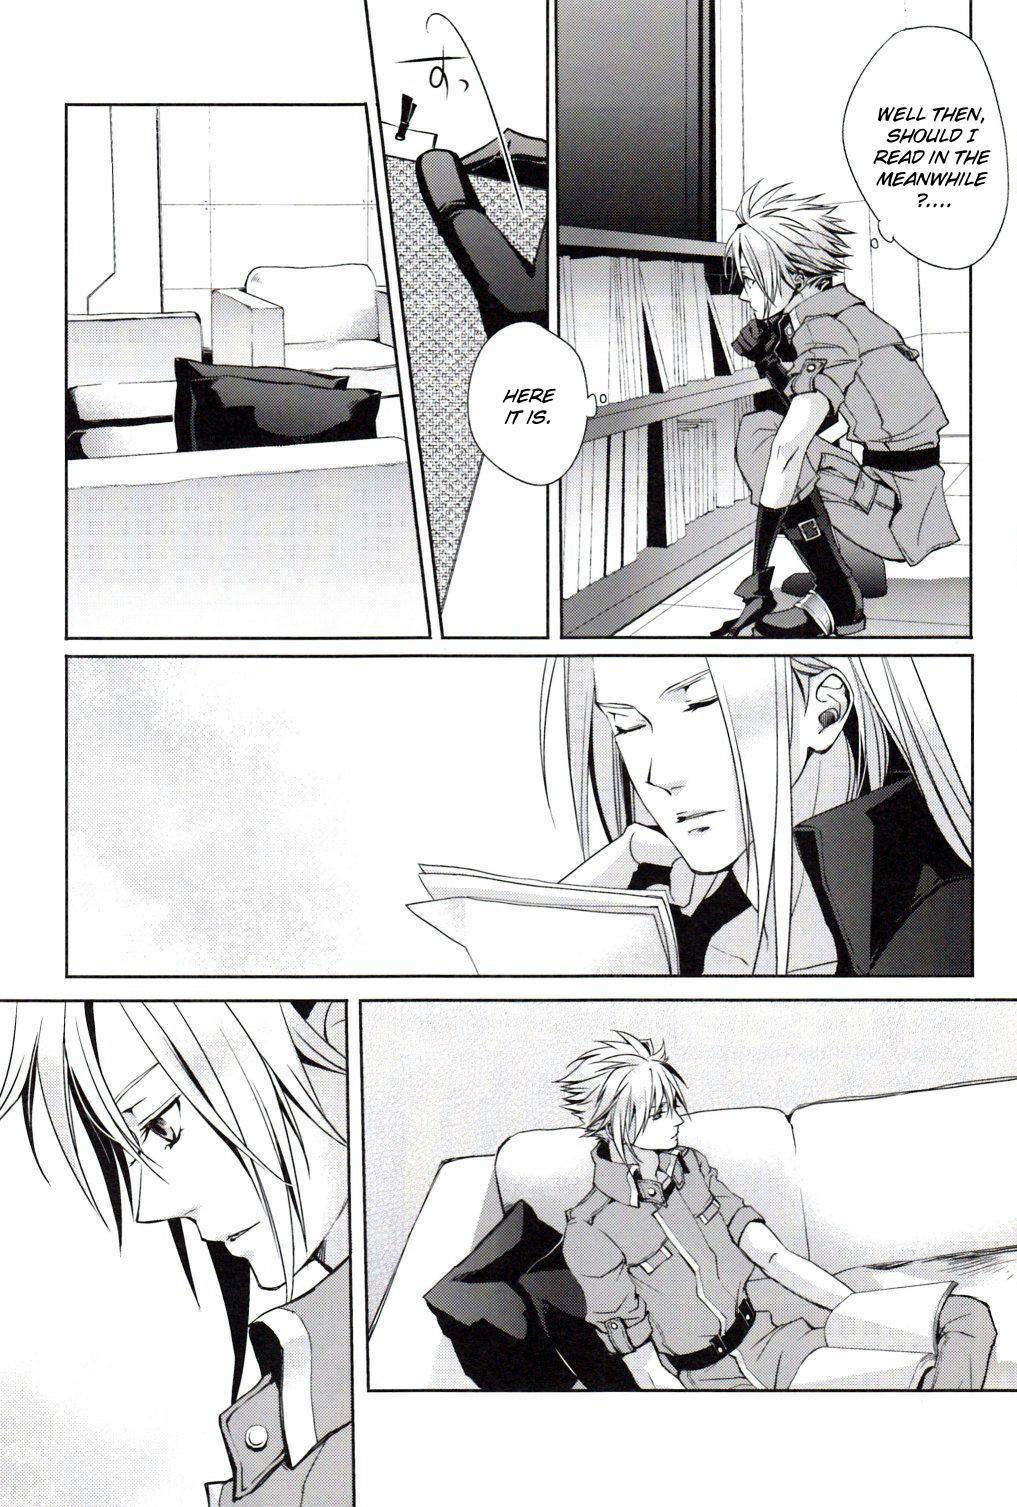 Butthole sence of distance - Final fantasy vii Gaygroupsex - Page 8